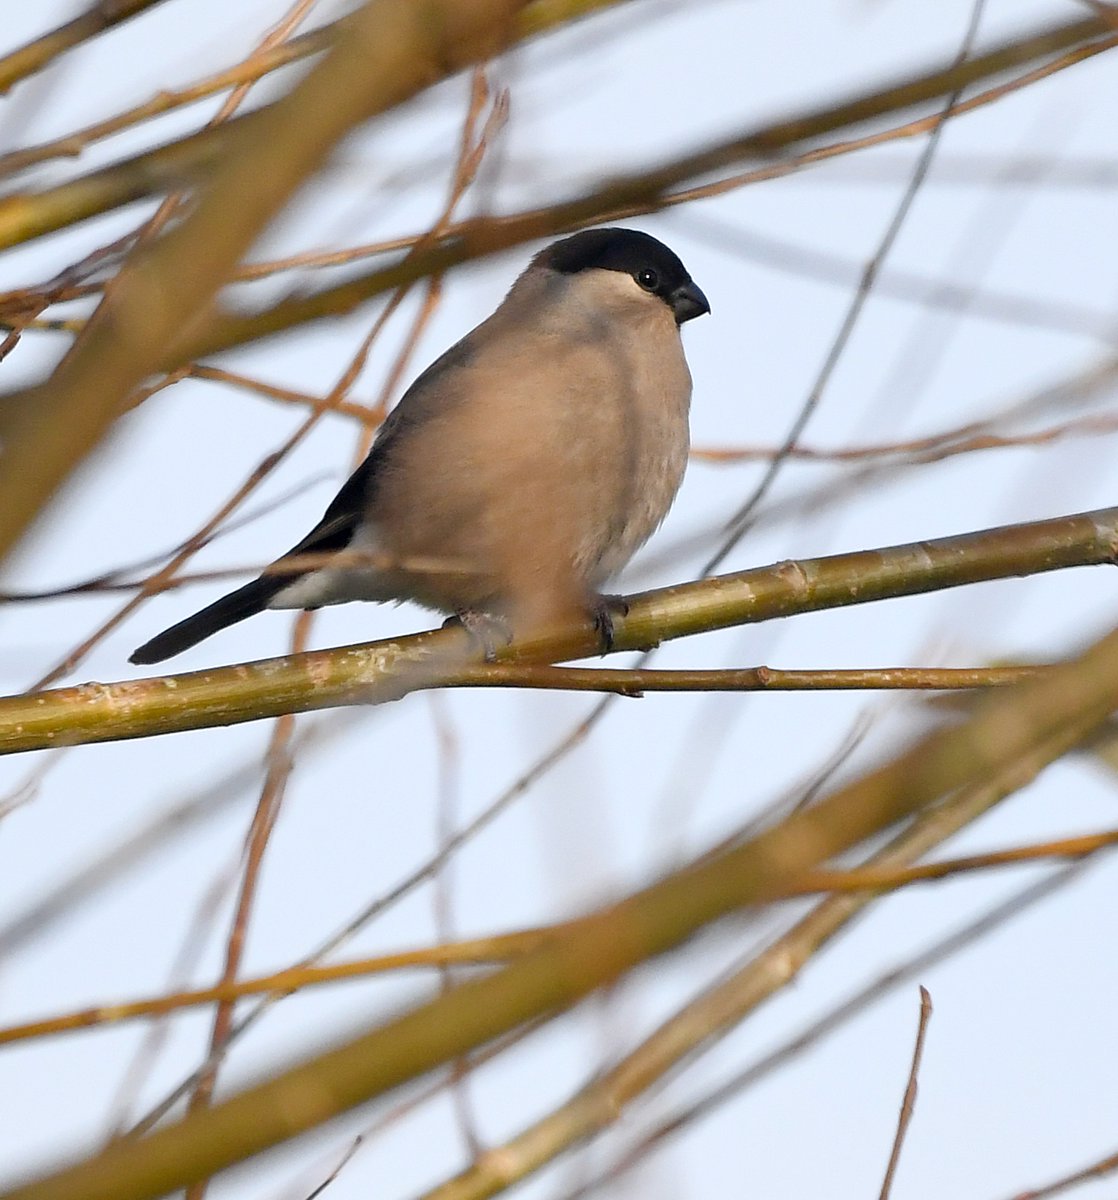 BullfinchYou are lucky if you have Bullfinches visiting your garden!The male is stunningly beautiful with his pinky red underparts, the female is a duller buff.Both sexes have a black head and face and their white rump is obvious as they fly away #SelfIsolationBirdWatch 